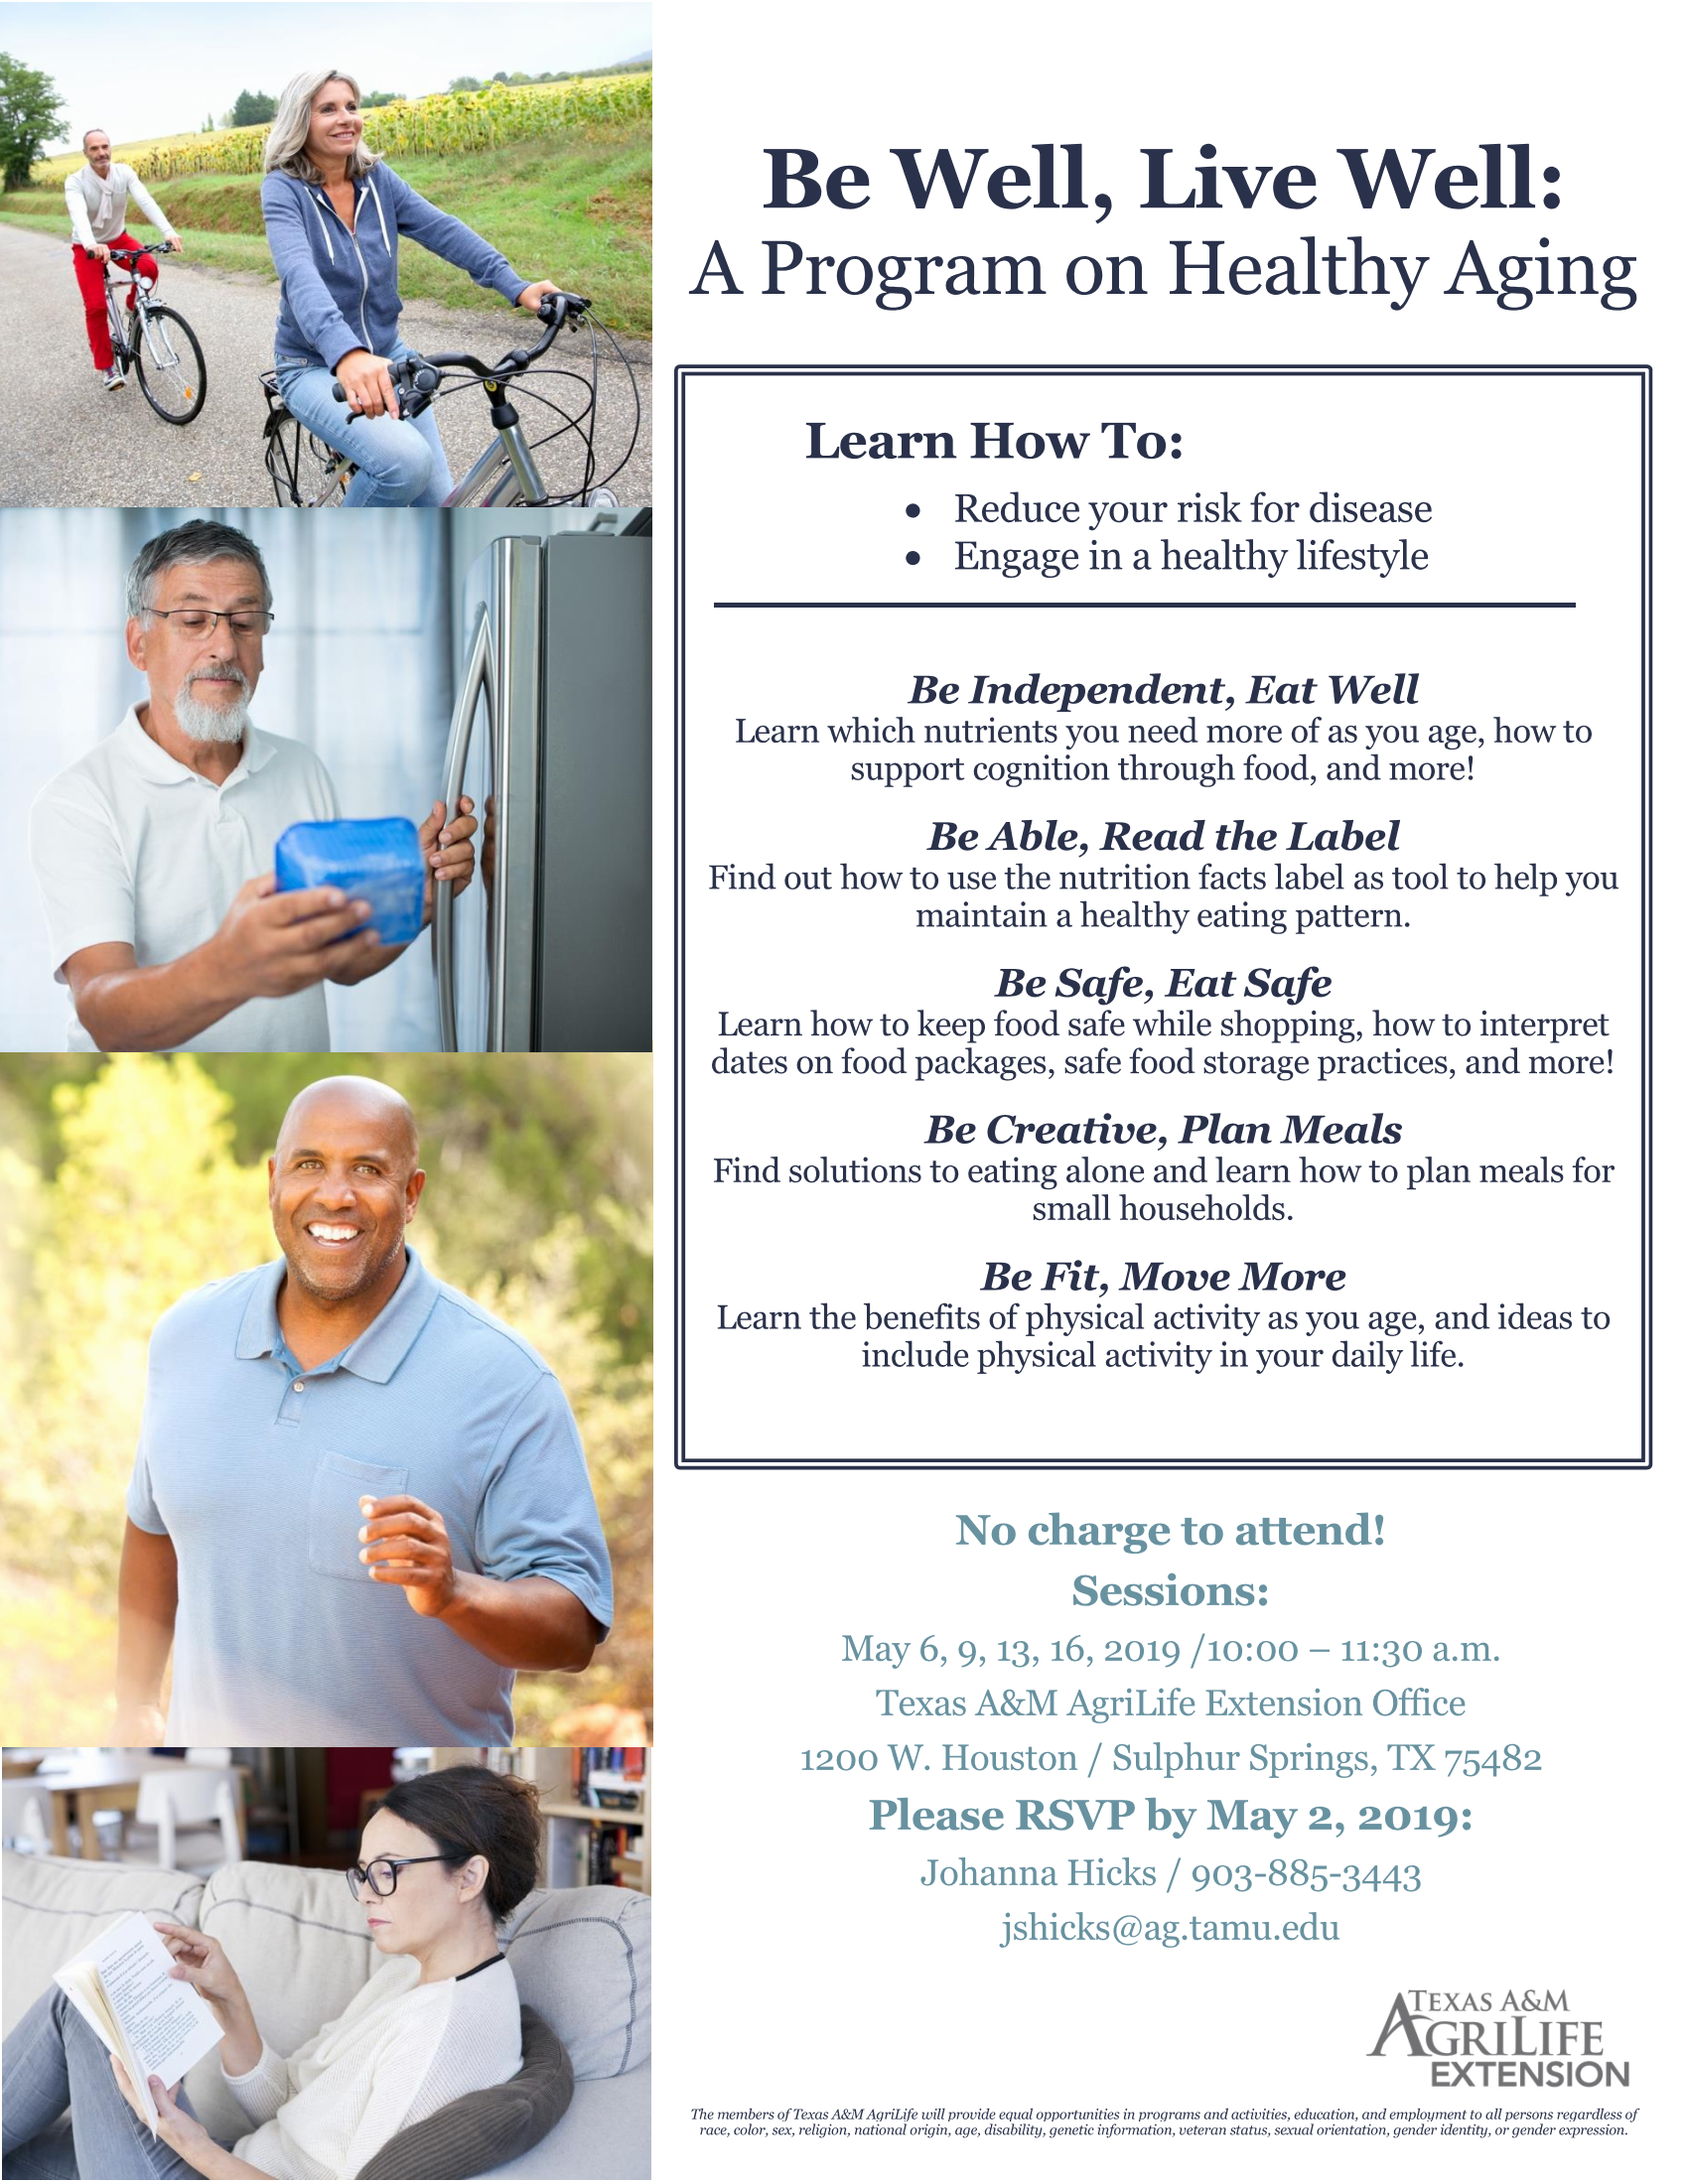 Texas A&M AgriLife Extension – Hopkins County Office Hosting Be Well, Live Well Healthy Aging Series